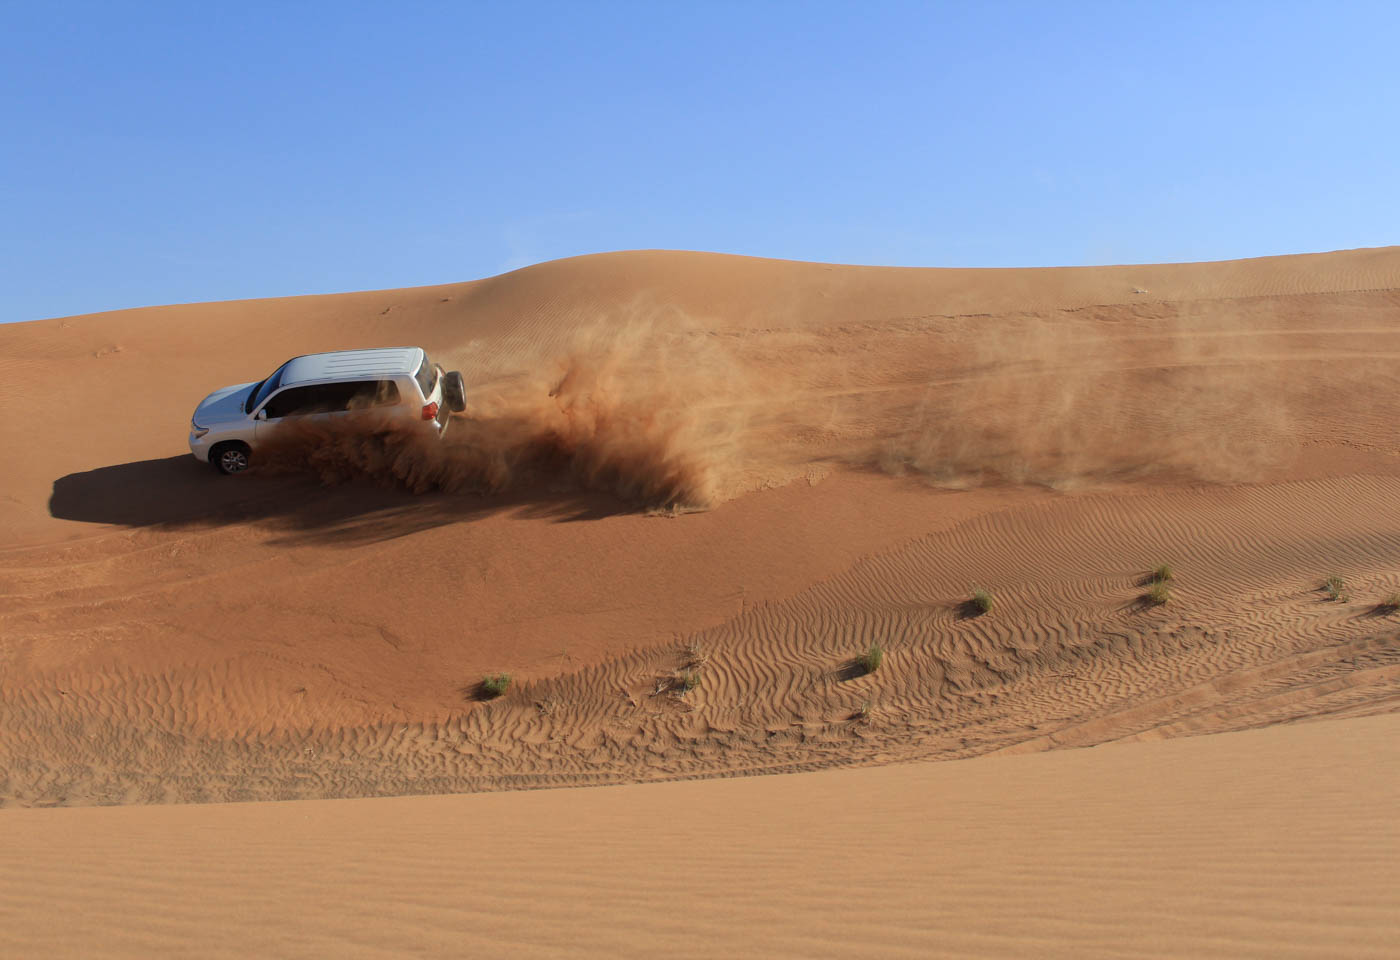 4WD on sand dunes taken with Canon EOS 1300D DSLR camera